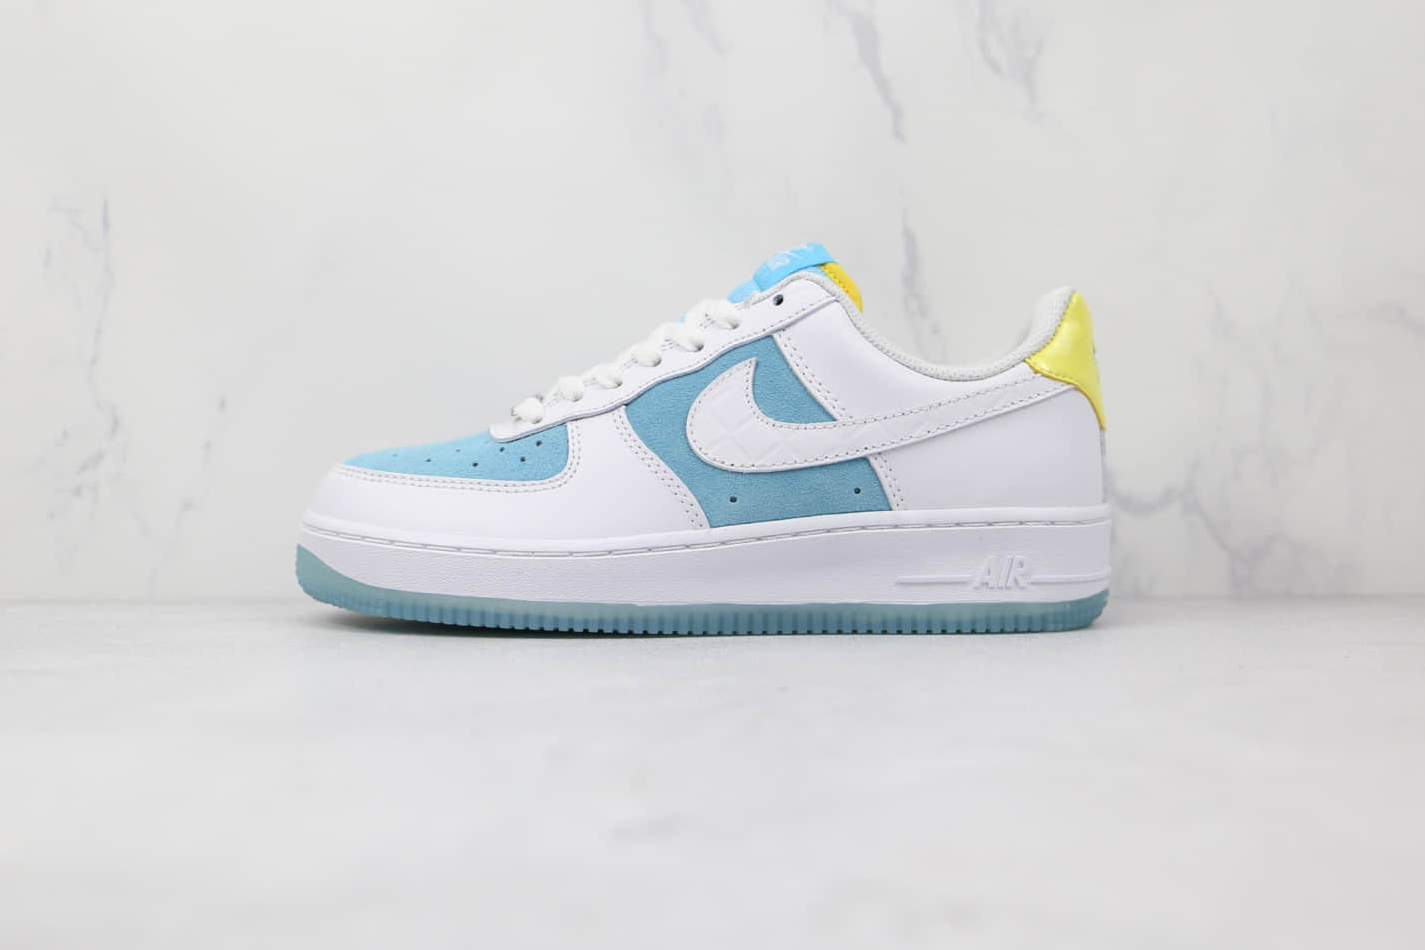 Nike Air Force 1 07 Low White Light Blue AA7687-400 - Stylish Sneakers for Men & Women